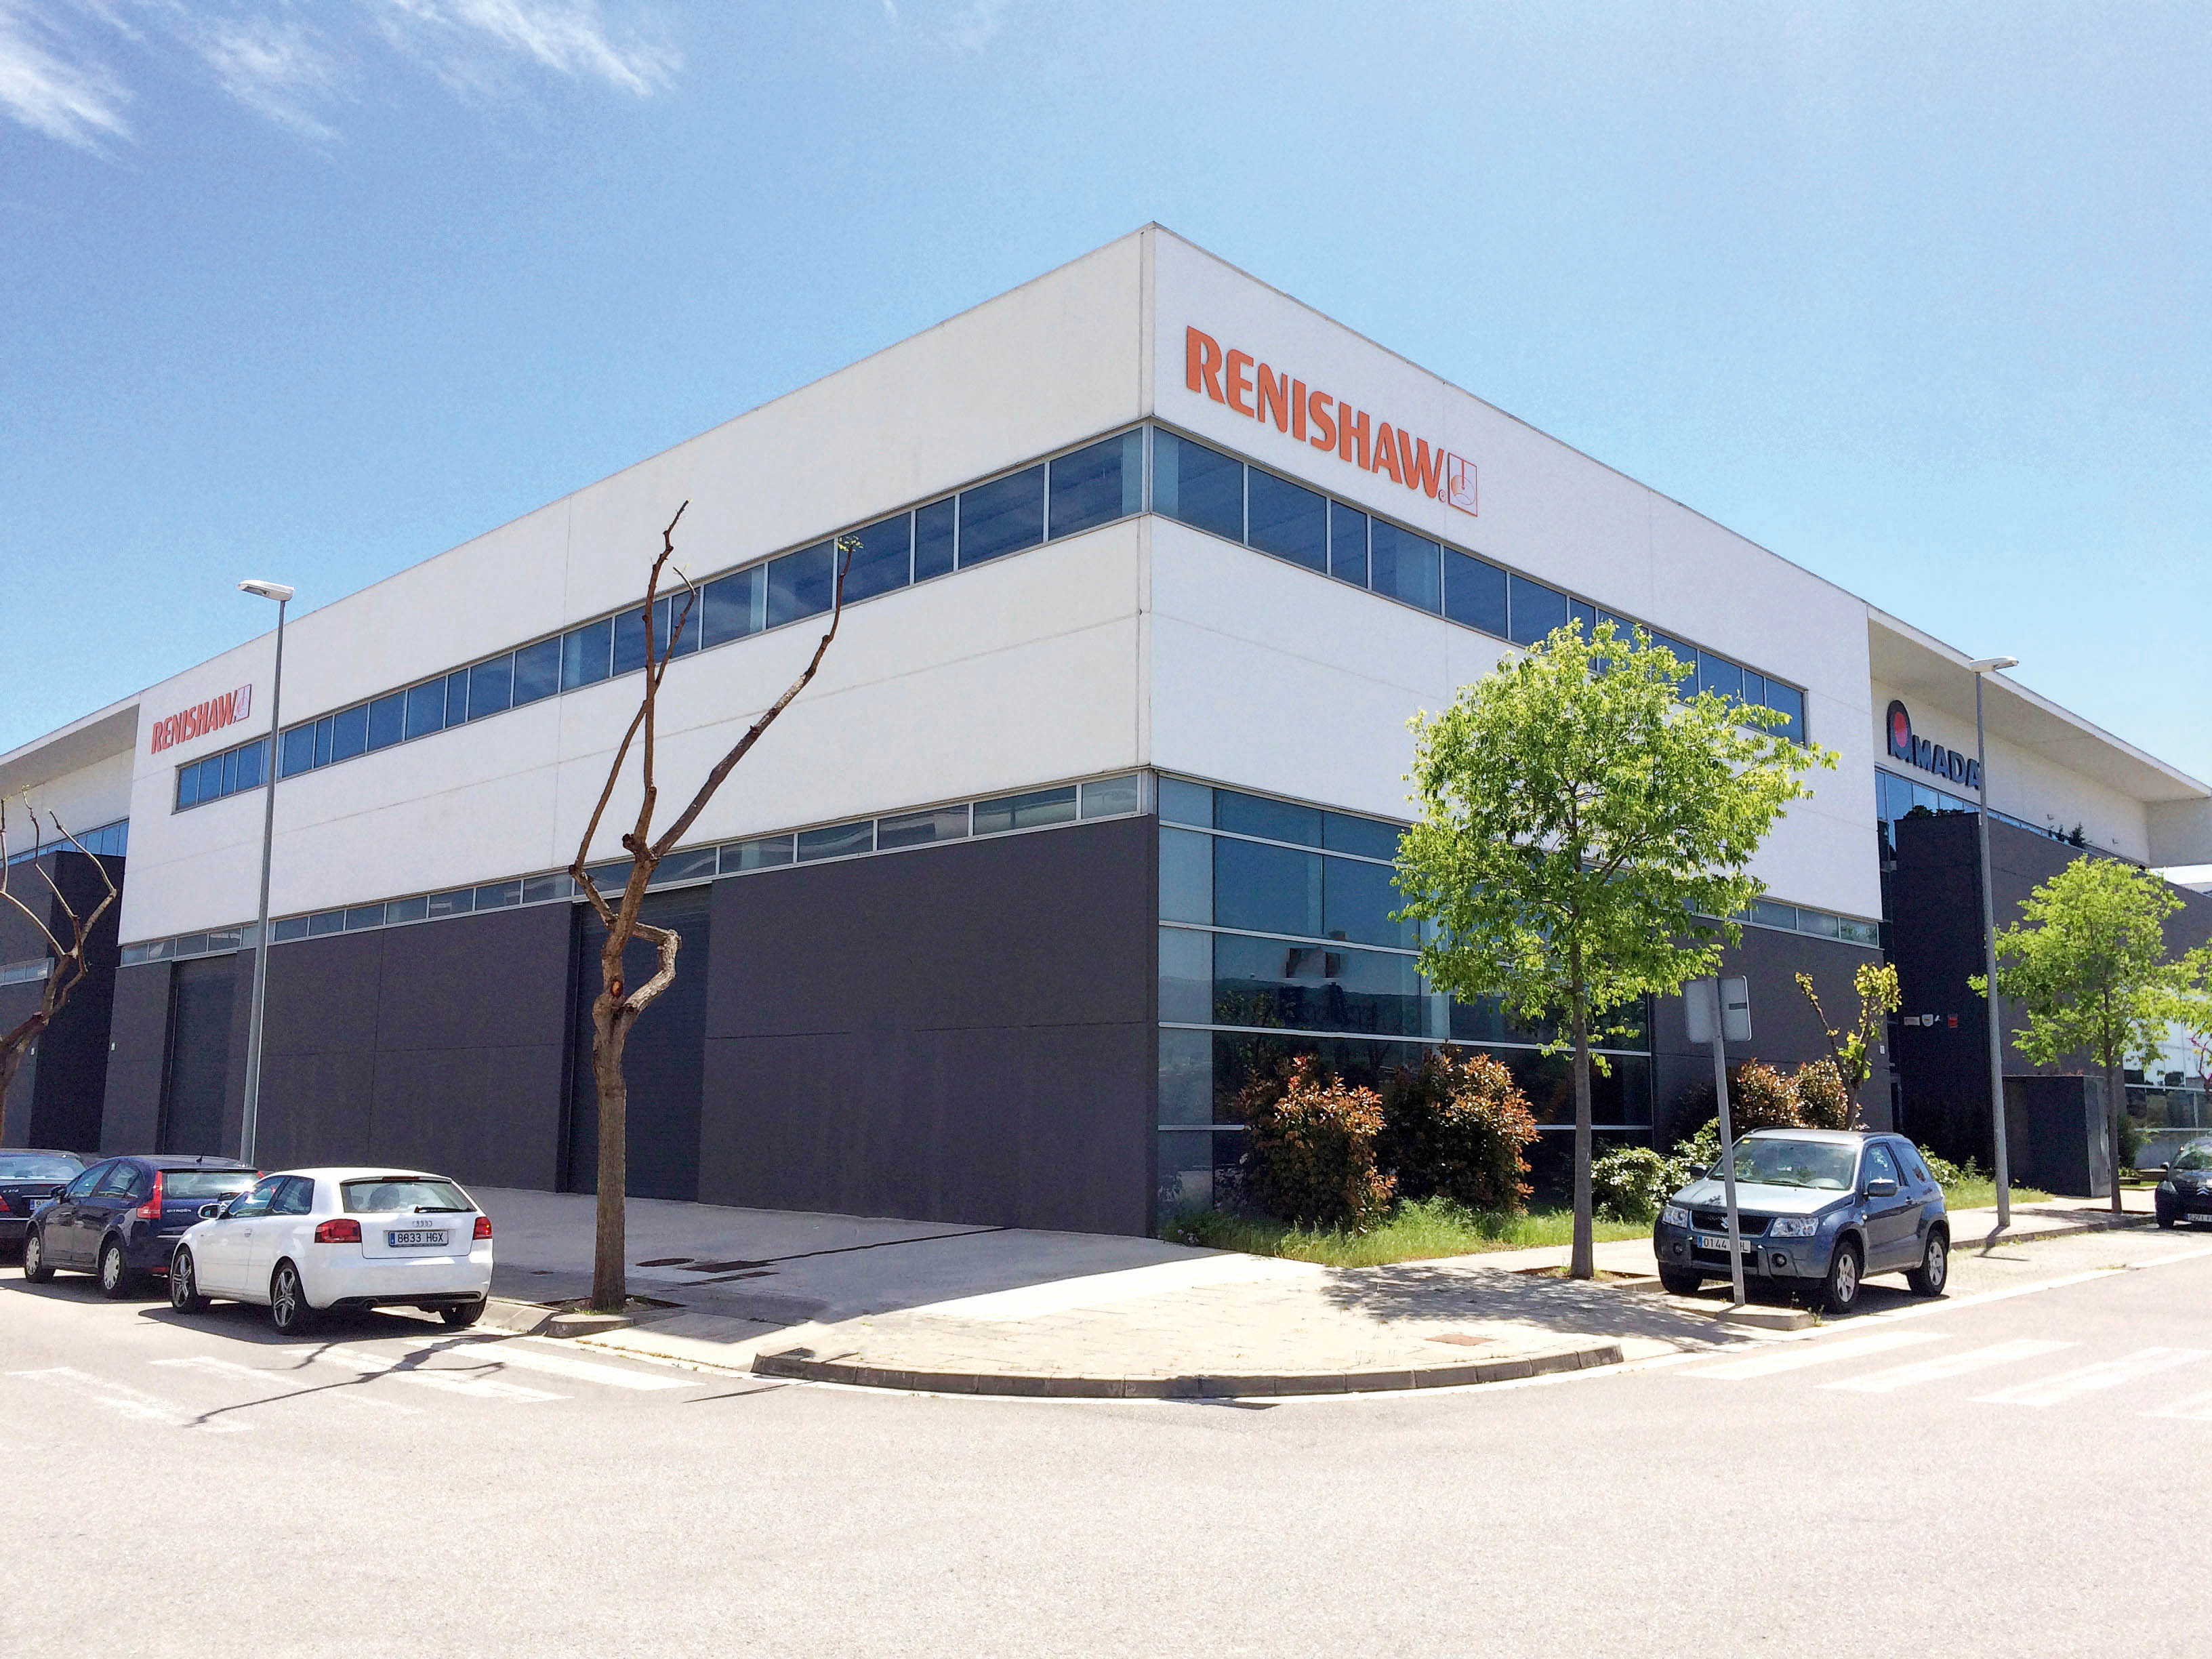 UK 3D printing company Renishaw has opened a new additive manufacturing (AM) center in Barcelona, Spain.